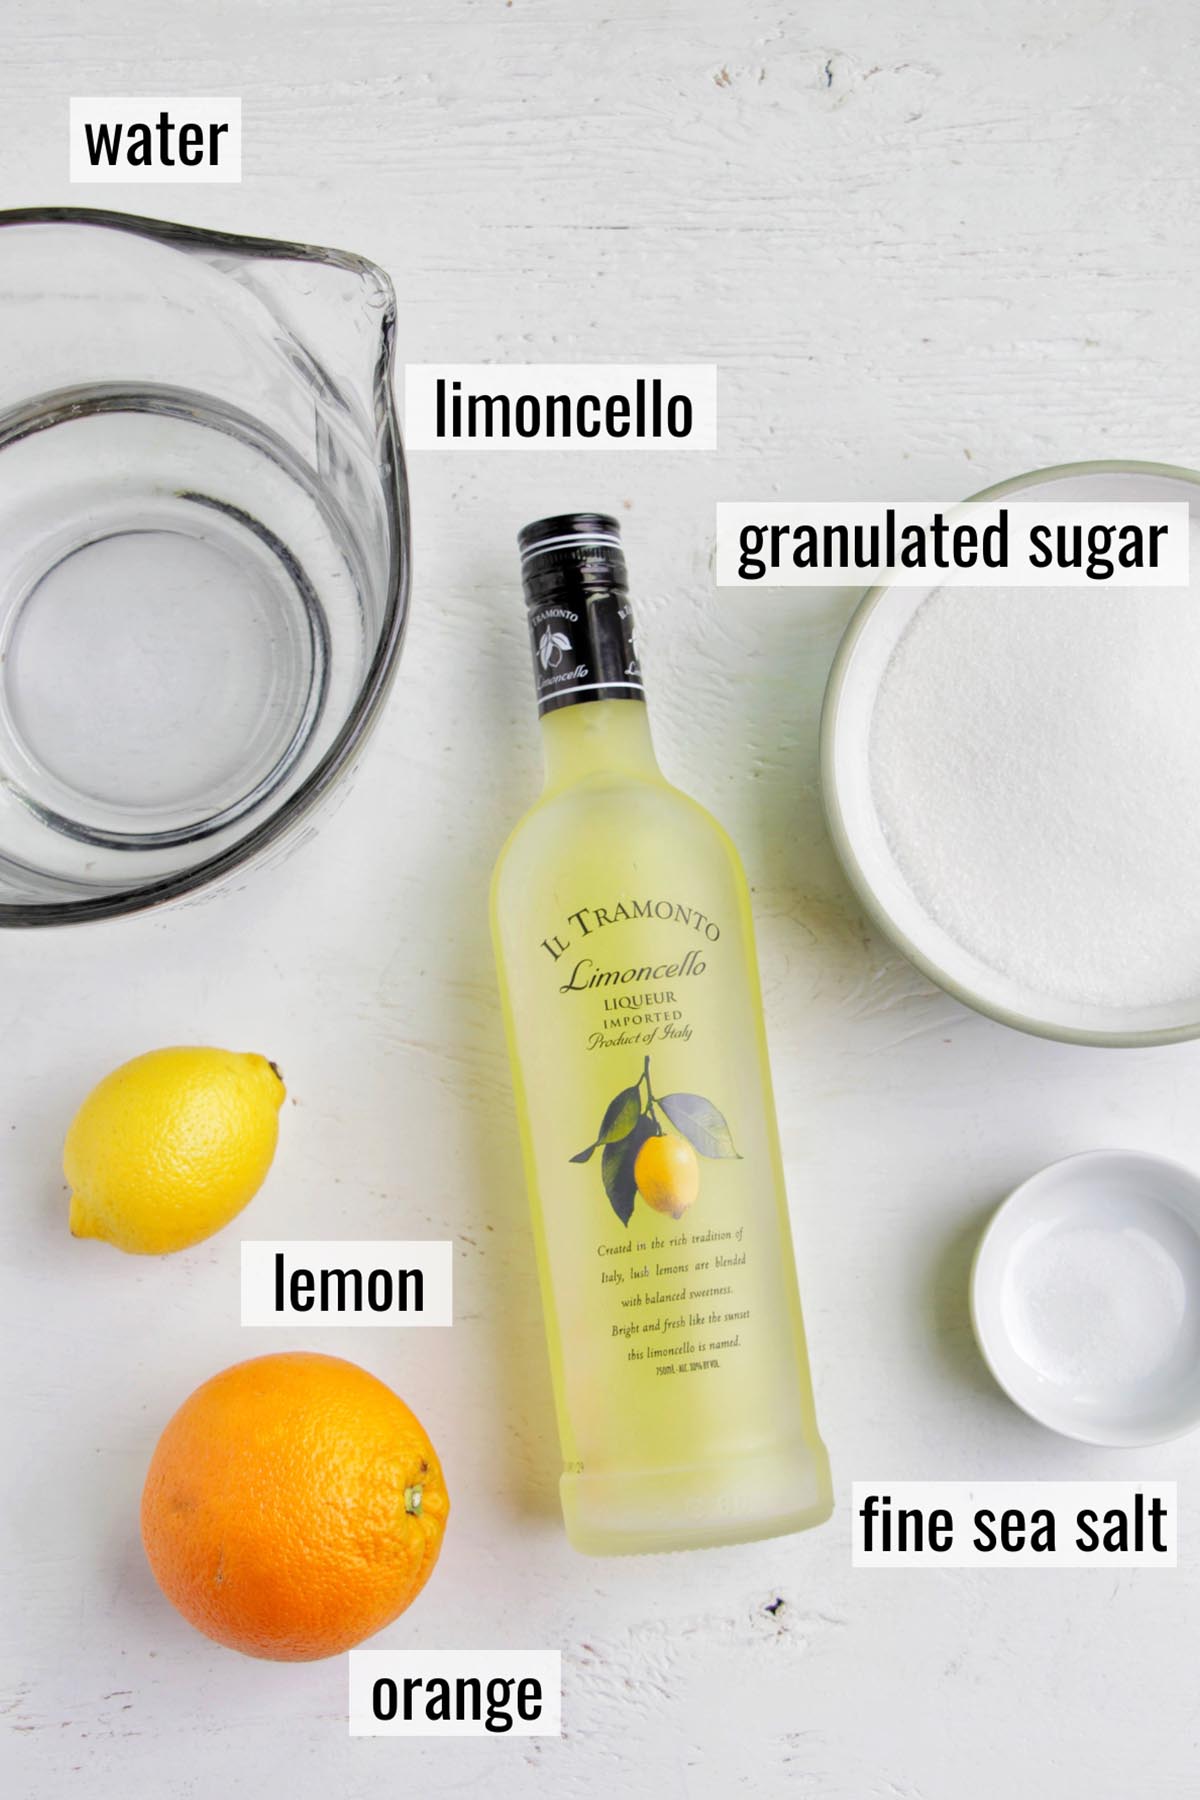 limoncello sorbet ingredients with labels.